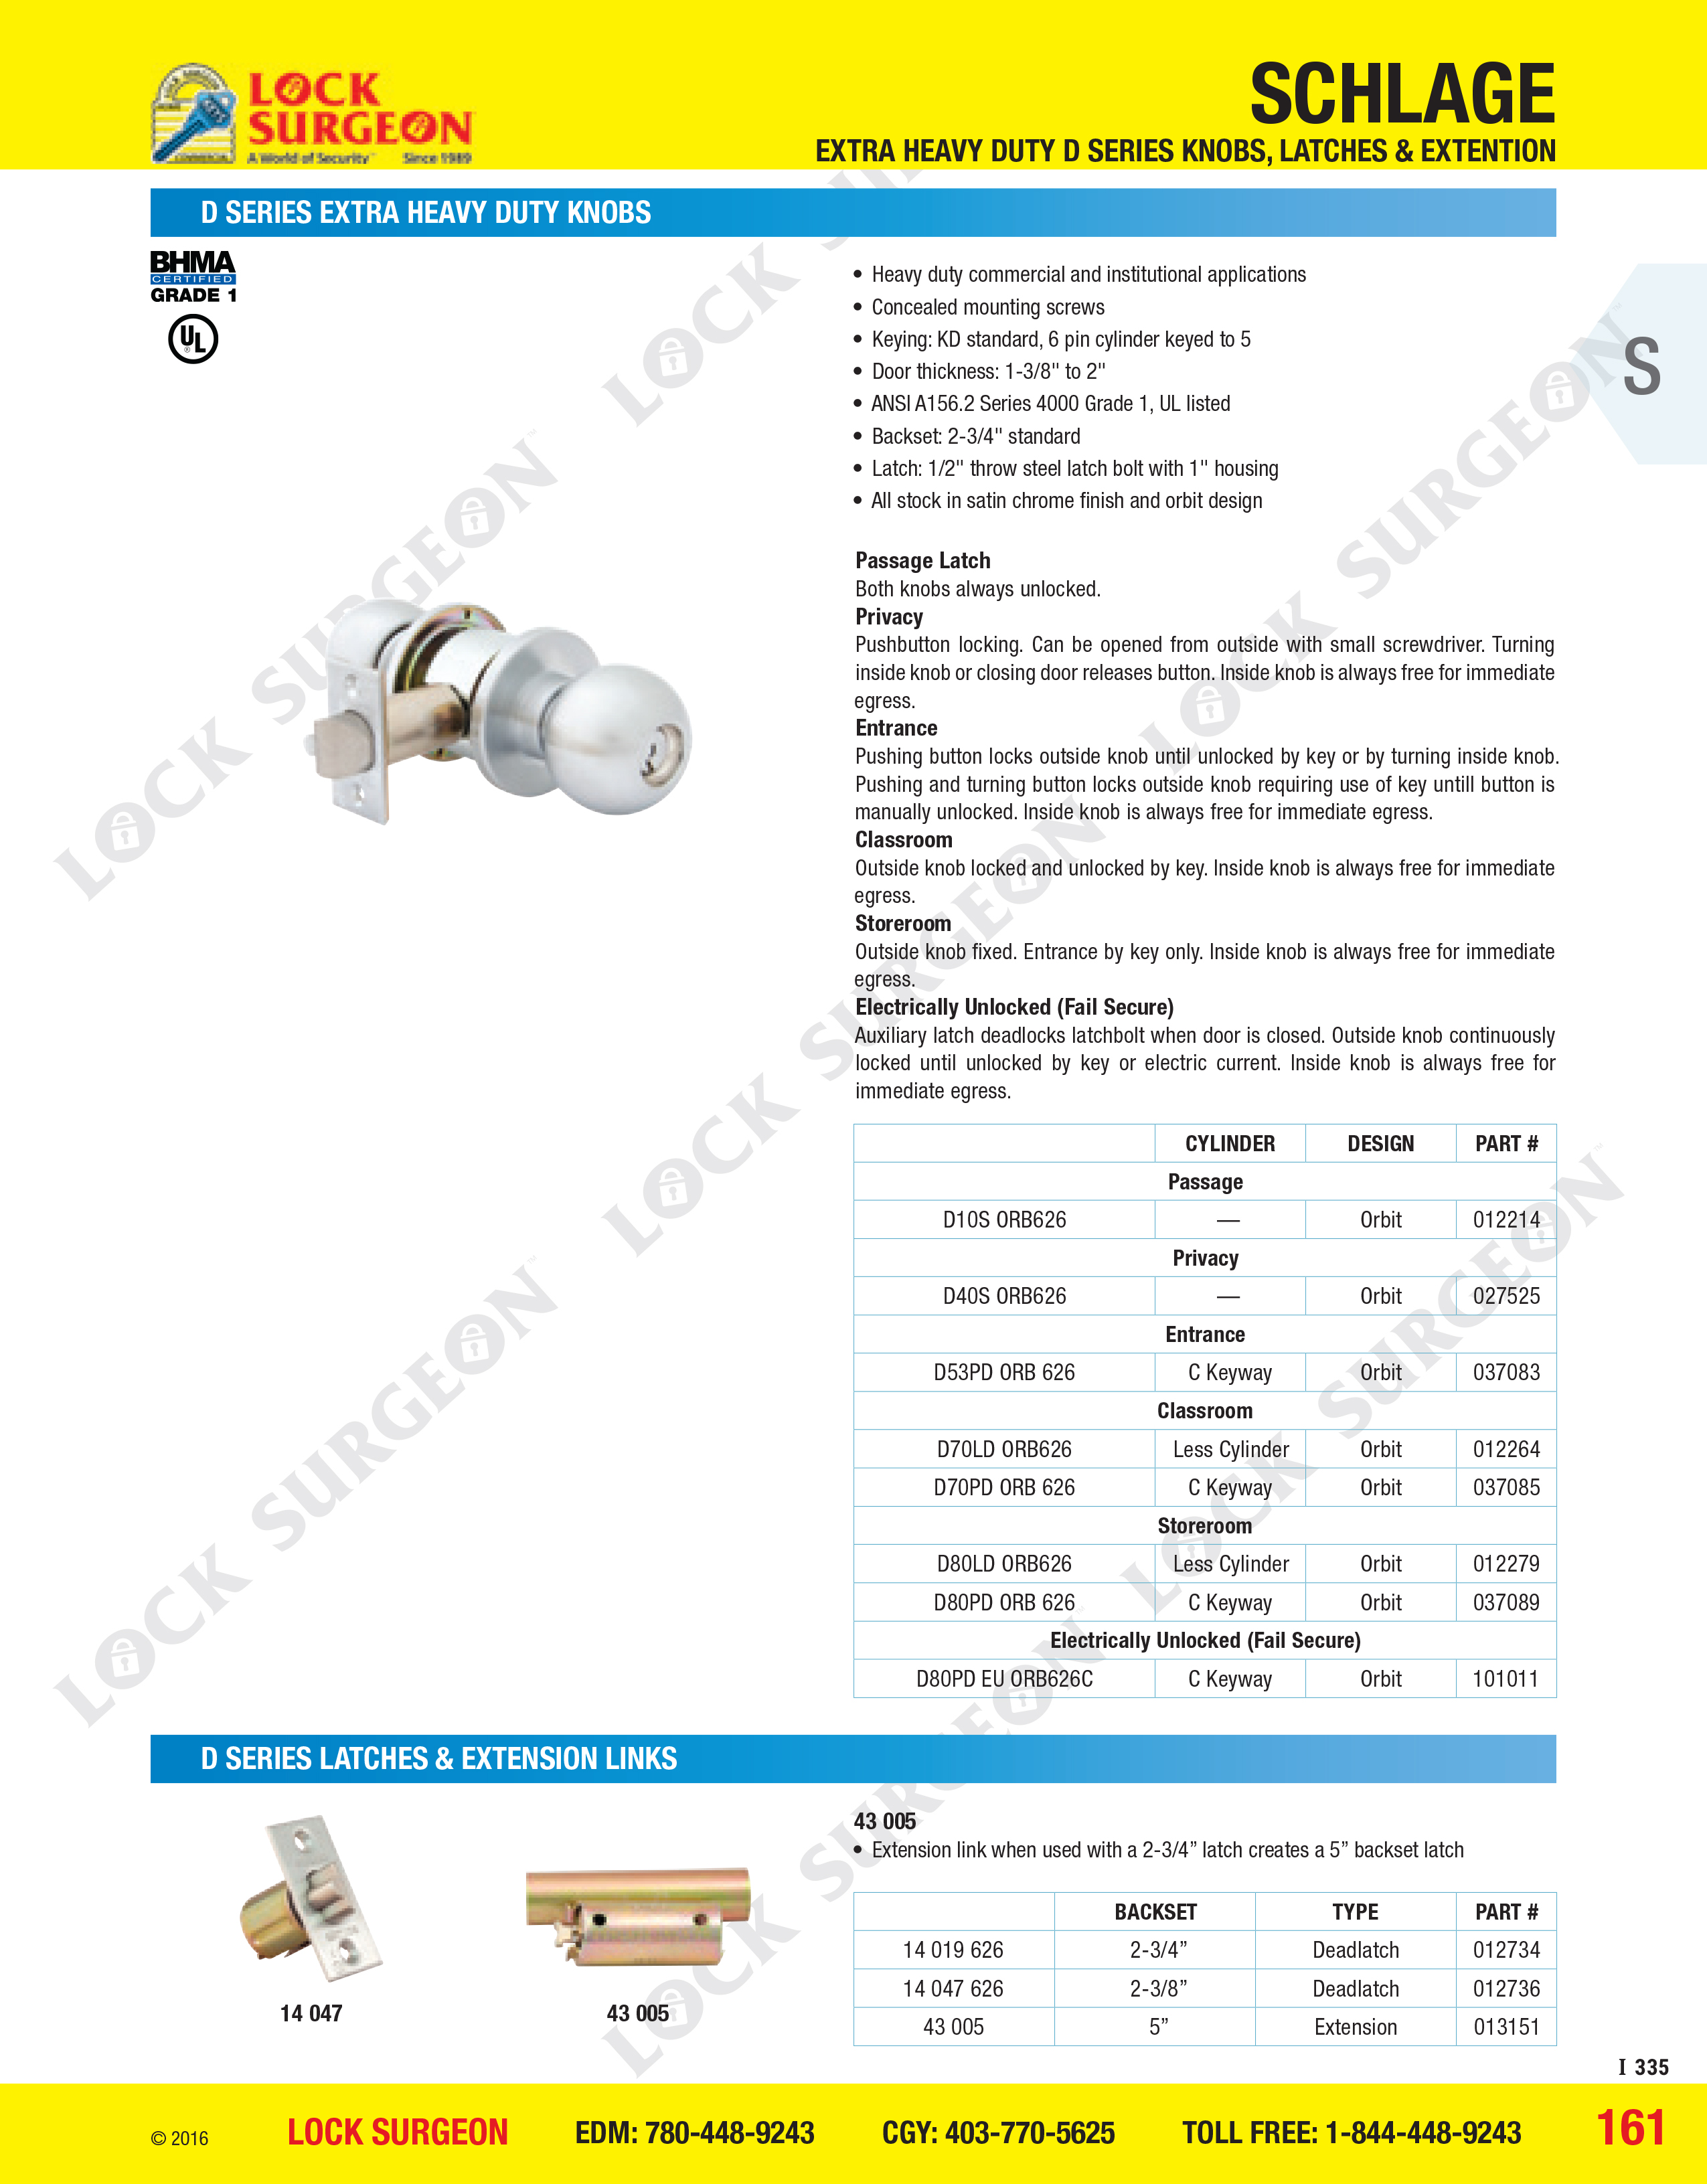 Schalge D-series Extra Heavy Duty commercial door knobs Grade 1 ball knob variety of functions.